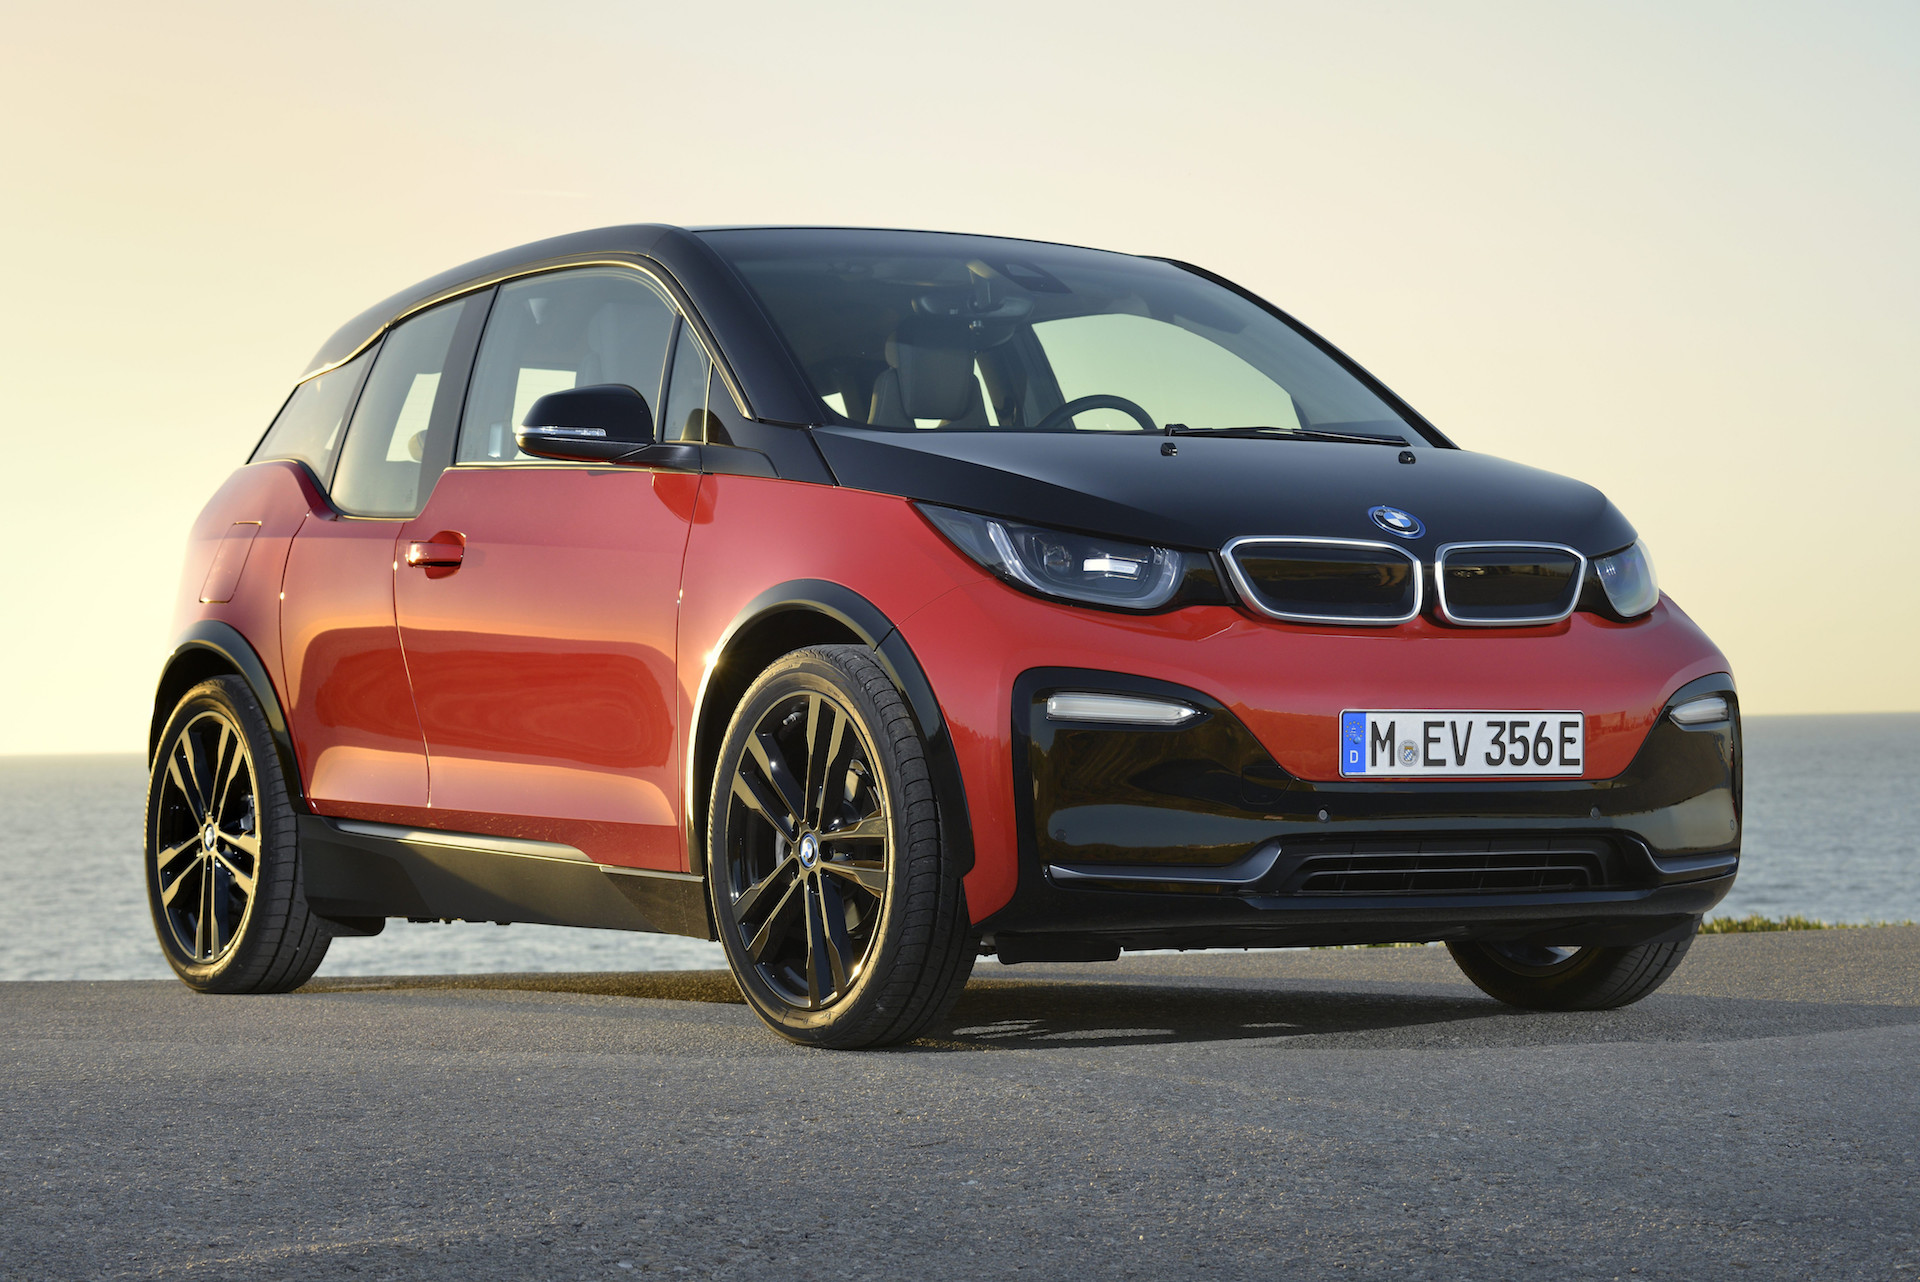 U.S. BMW i3 REx Actually Has 2.4 Gallon Gas Tank, But Clever